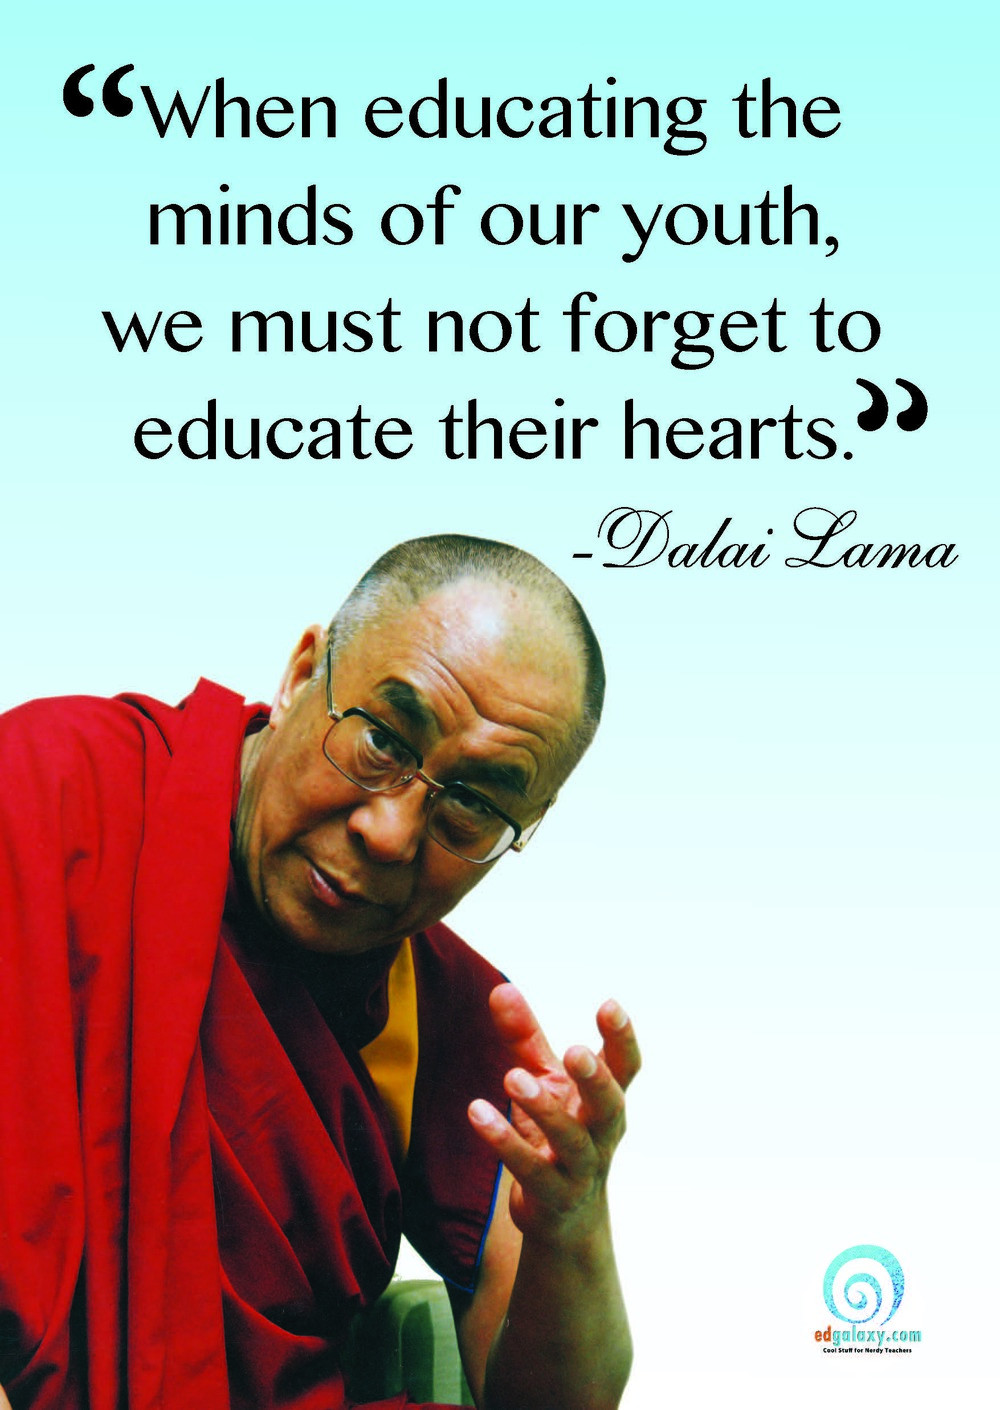 Famous Quotes On Education
 Education Quotes Famous Quotes for teachers and Students